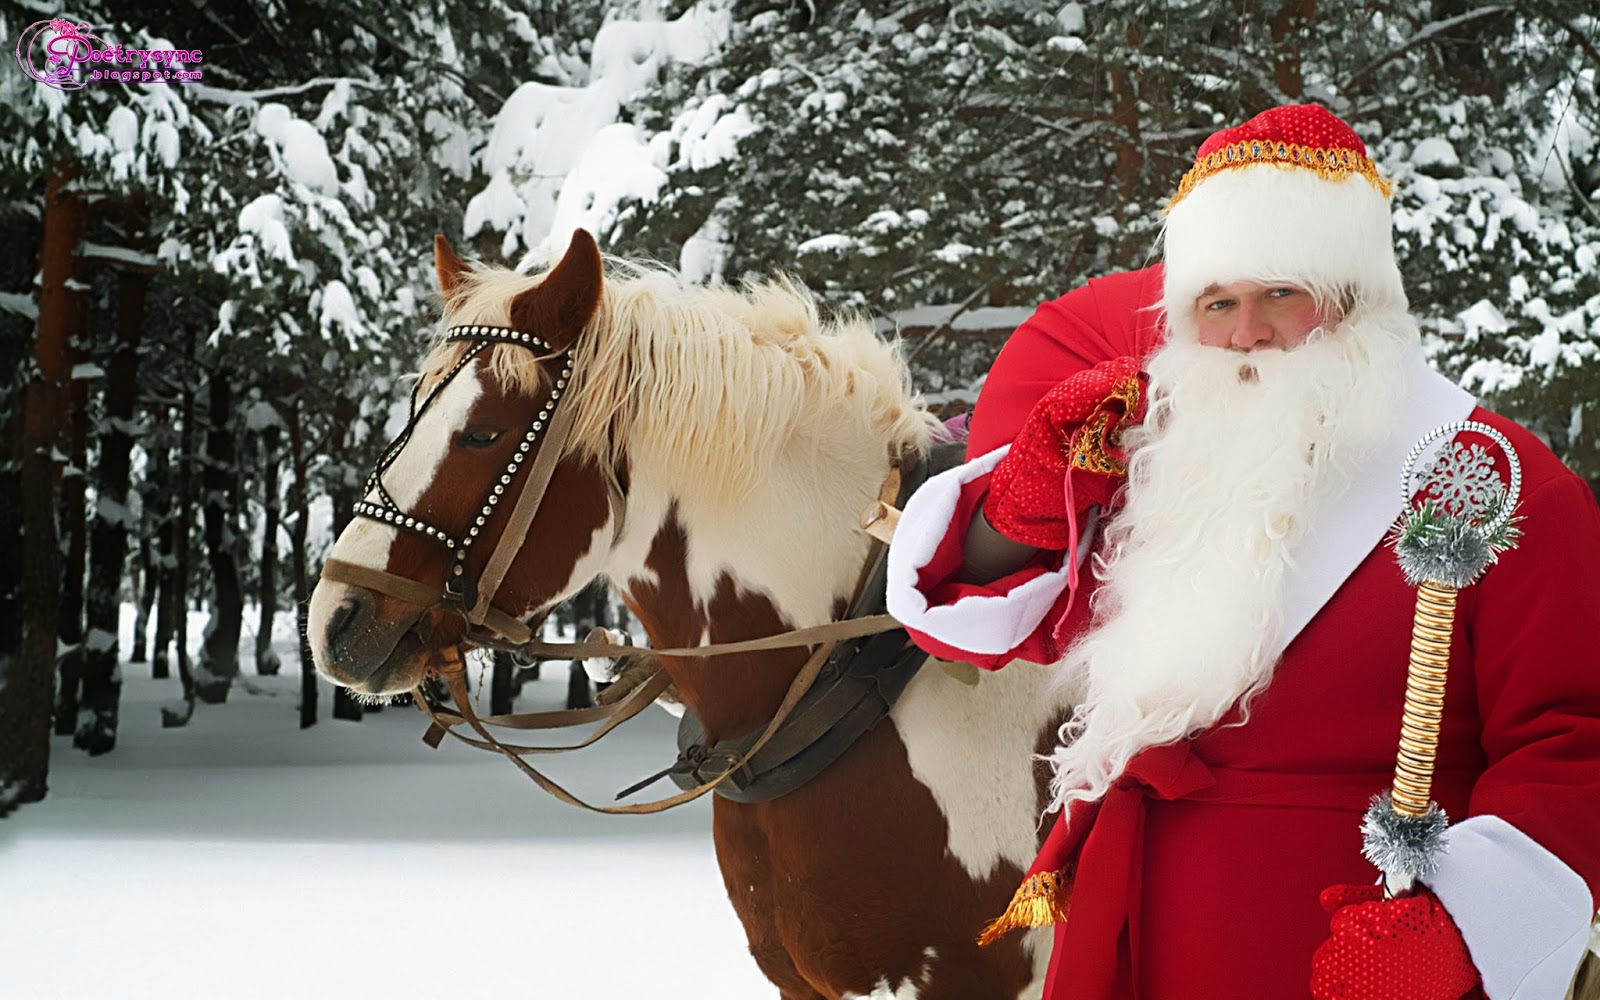 Merry Christmas Santa Claus Wallpaper In Snow With Horse